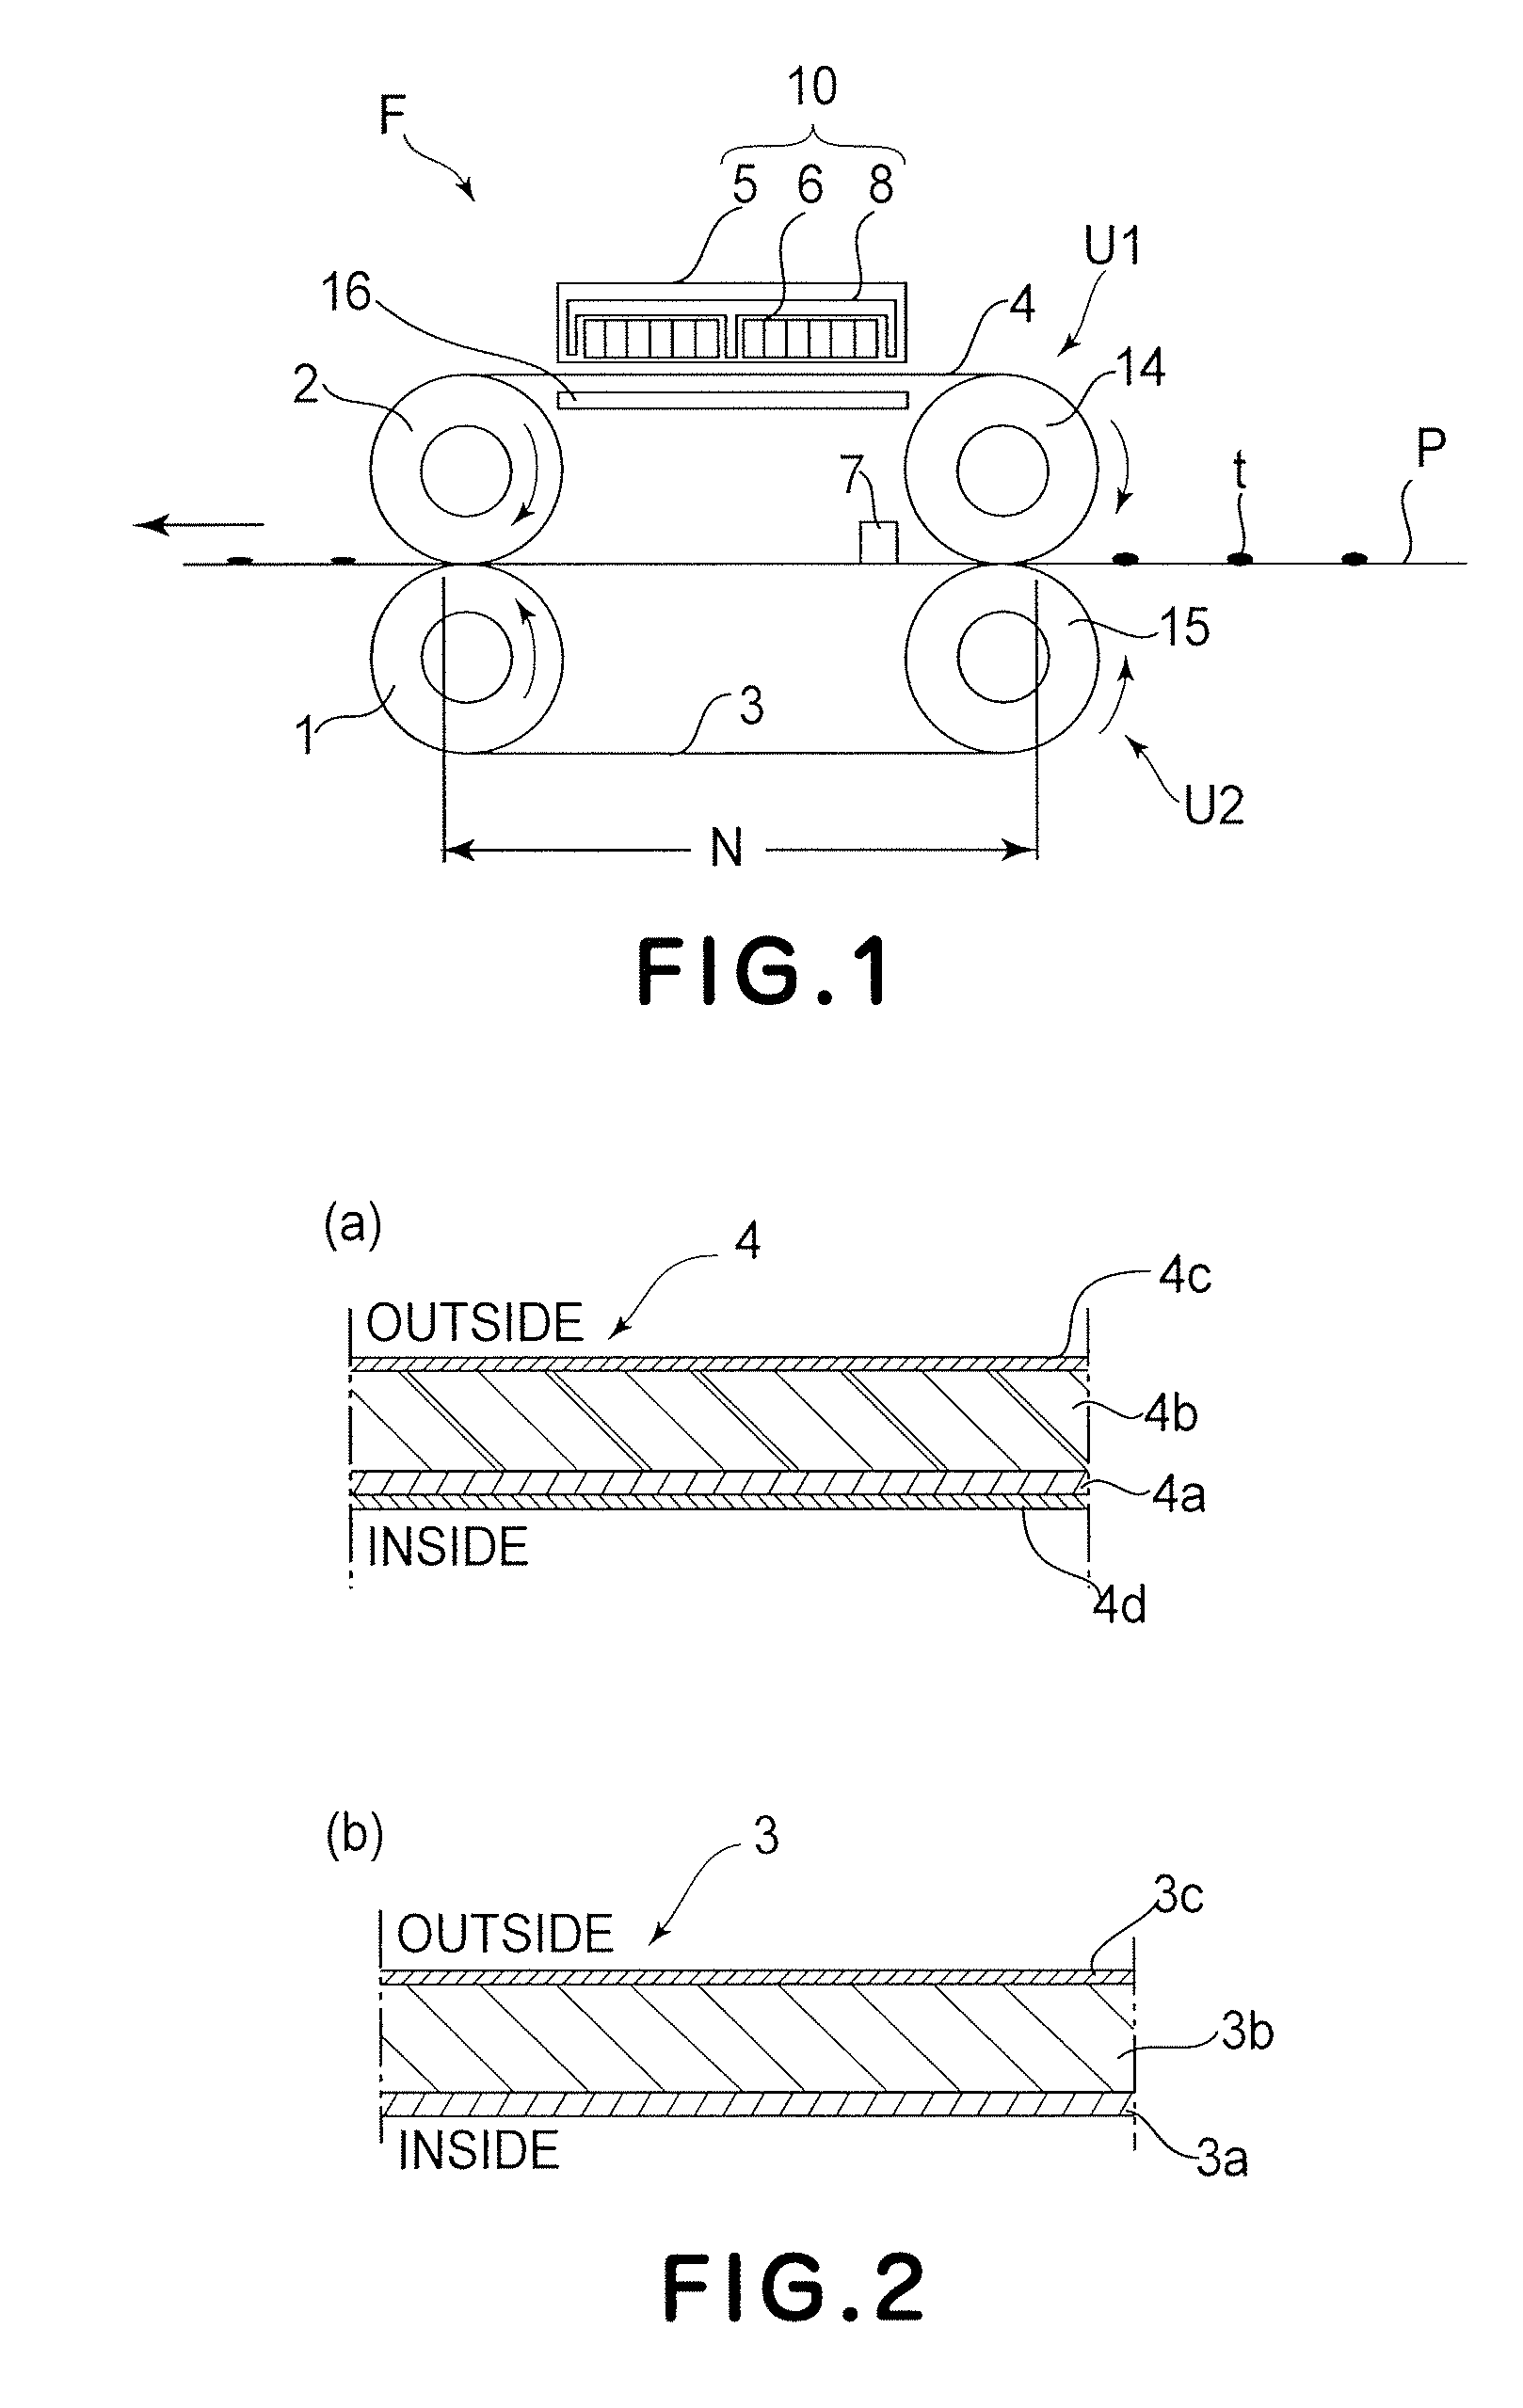 Image heating apparatus including a belt member for heating an image on a recording material